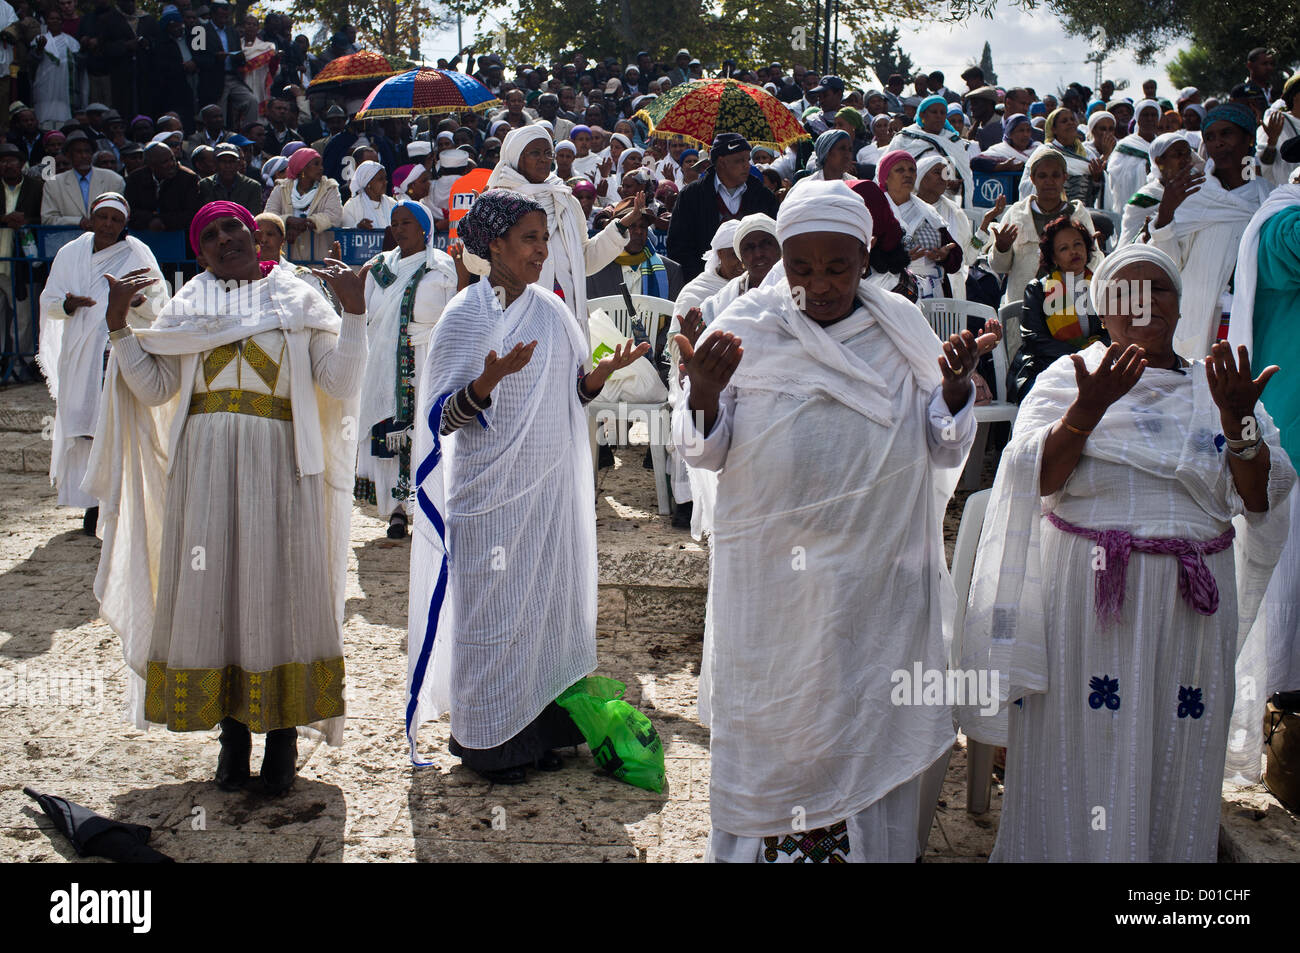 Jerusalem, Israel. 14th November 2012. Jewish Ethiopian woman wave their hands and bow in prayers of thanksgiving to God for delivering them to Israel. Jerusalem, Israel. 14-Nov-2012.   The Jewish Ethiopian community in Israel, Beta-Israel, celebrates the Sigd Holiday, symbolizing their yearning for Jerusalem for thousands of years, at the Sherover Promenade overlooking the Temple Mount. Credit:  Nir Alon / Alamy Live News Stock Photo